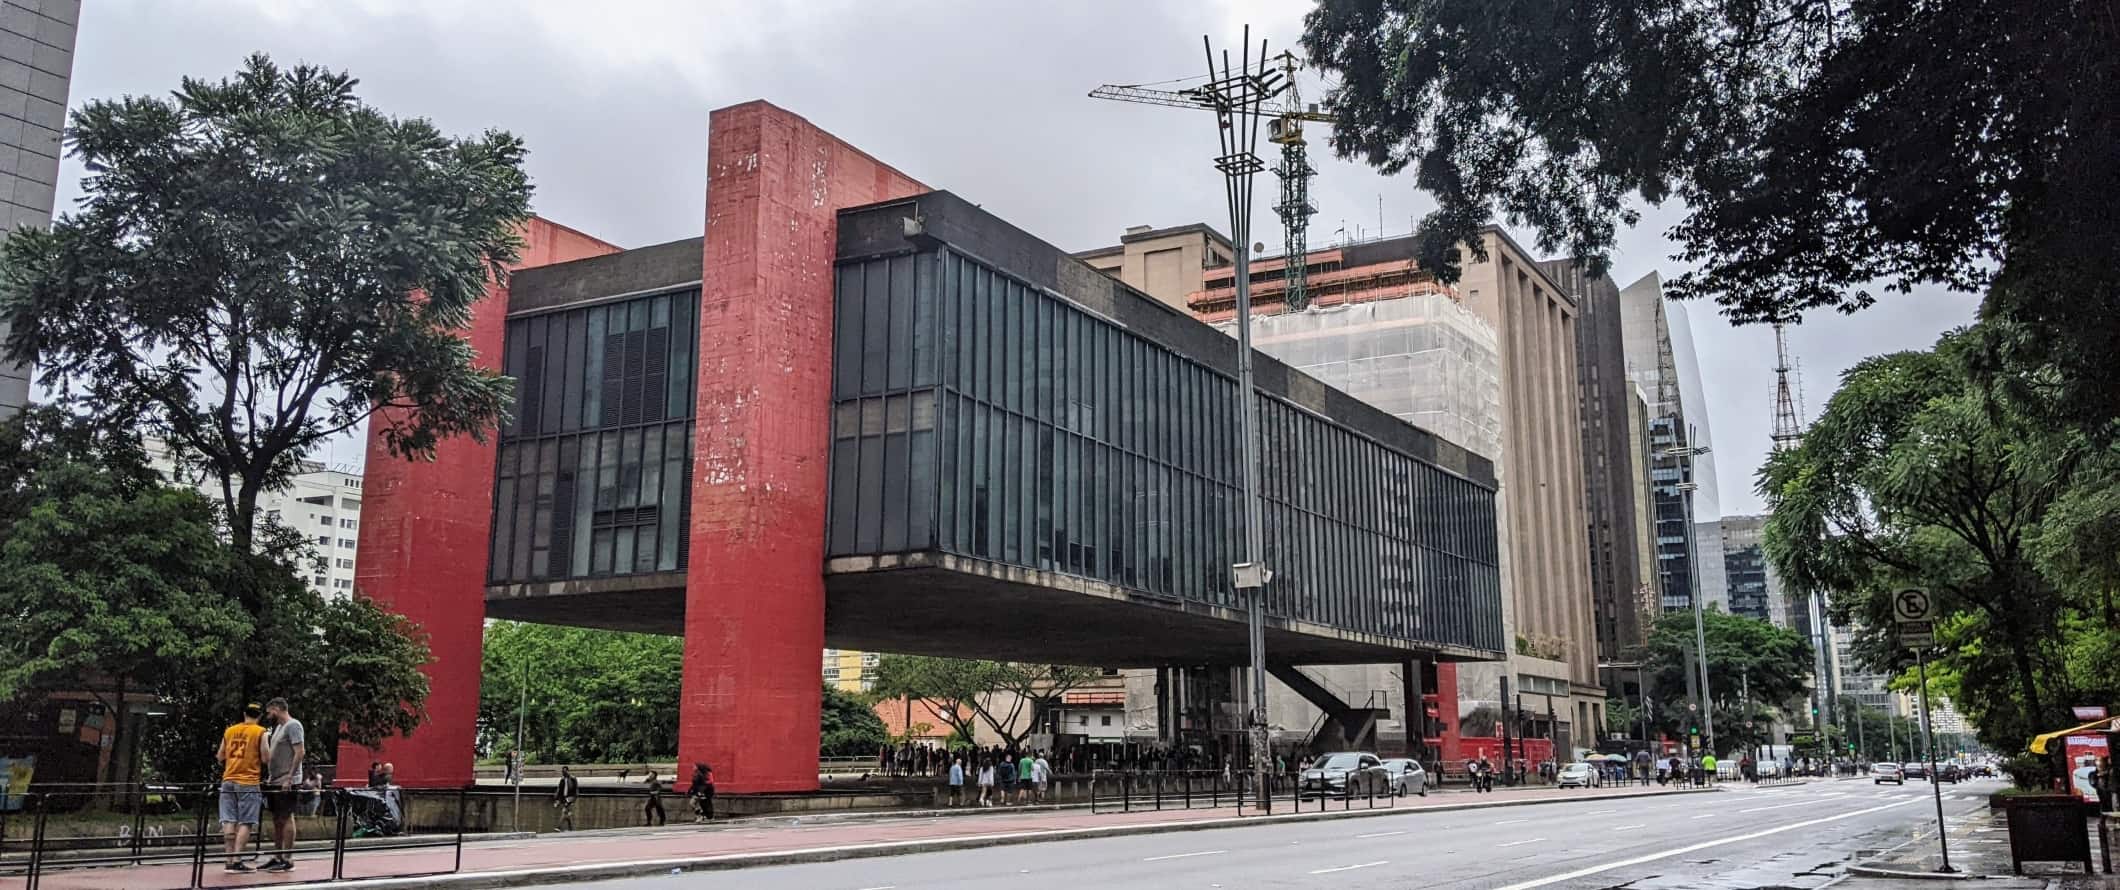 The recognizable MASP (Museum of Art of São Paulo) with its elevated concrete structure and red pillars, on Paulista Ave in São Paulo, Brazil